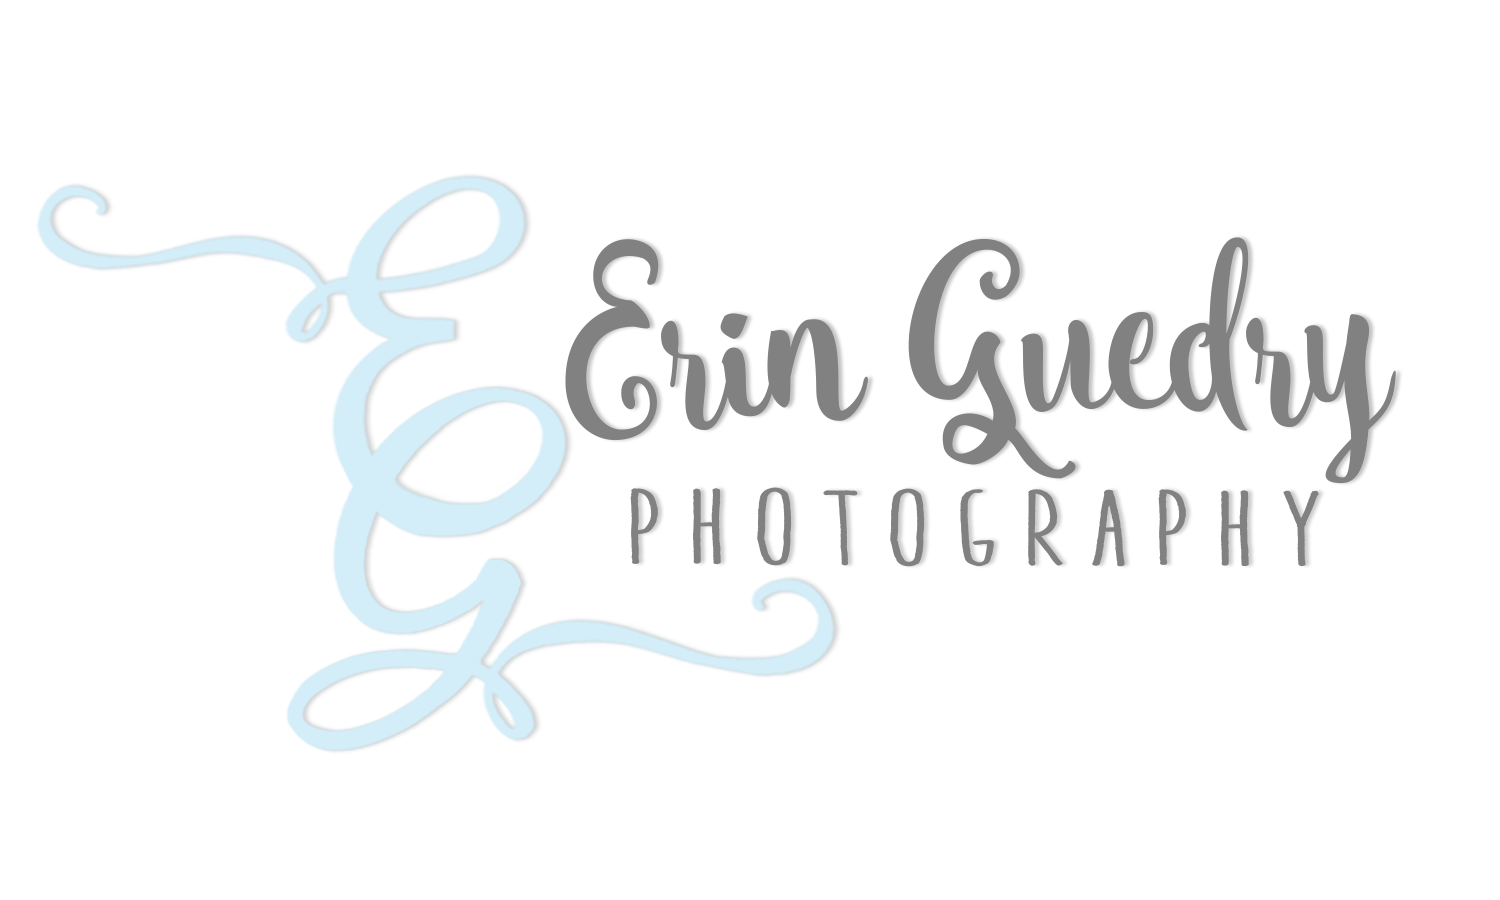 Erin Guedry Photography